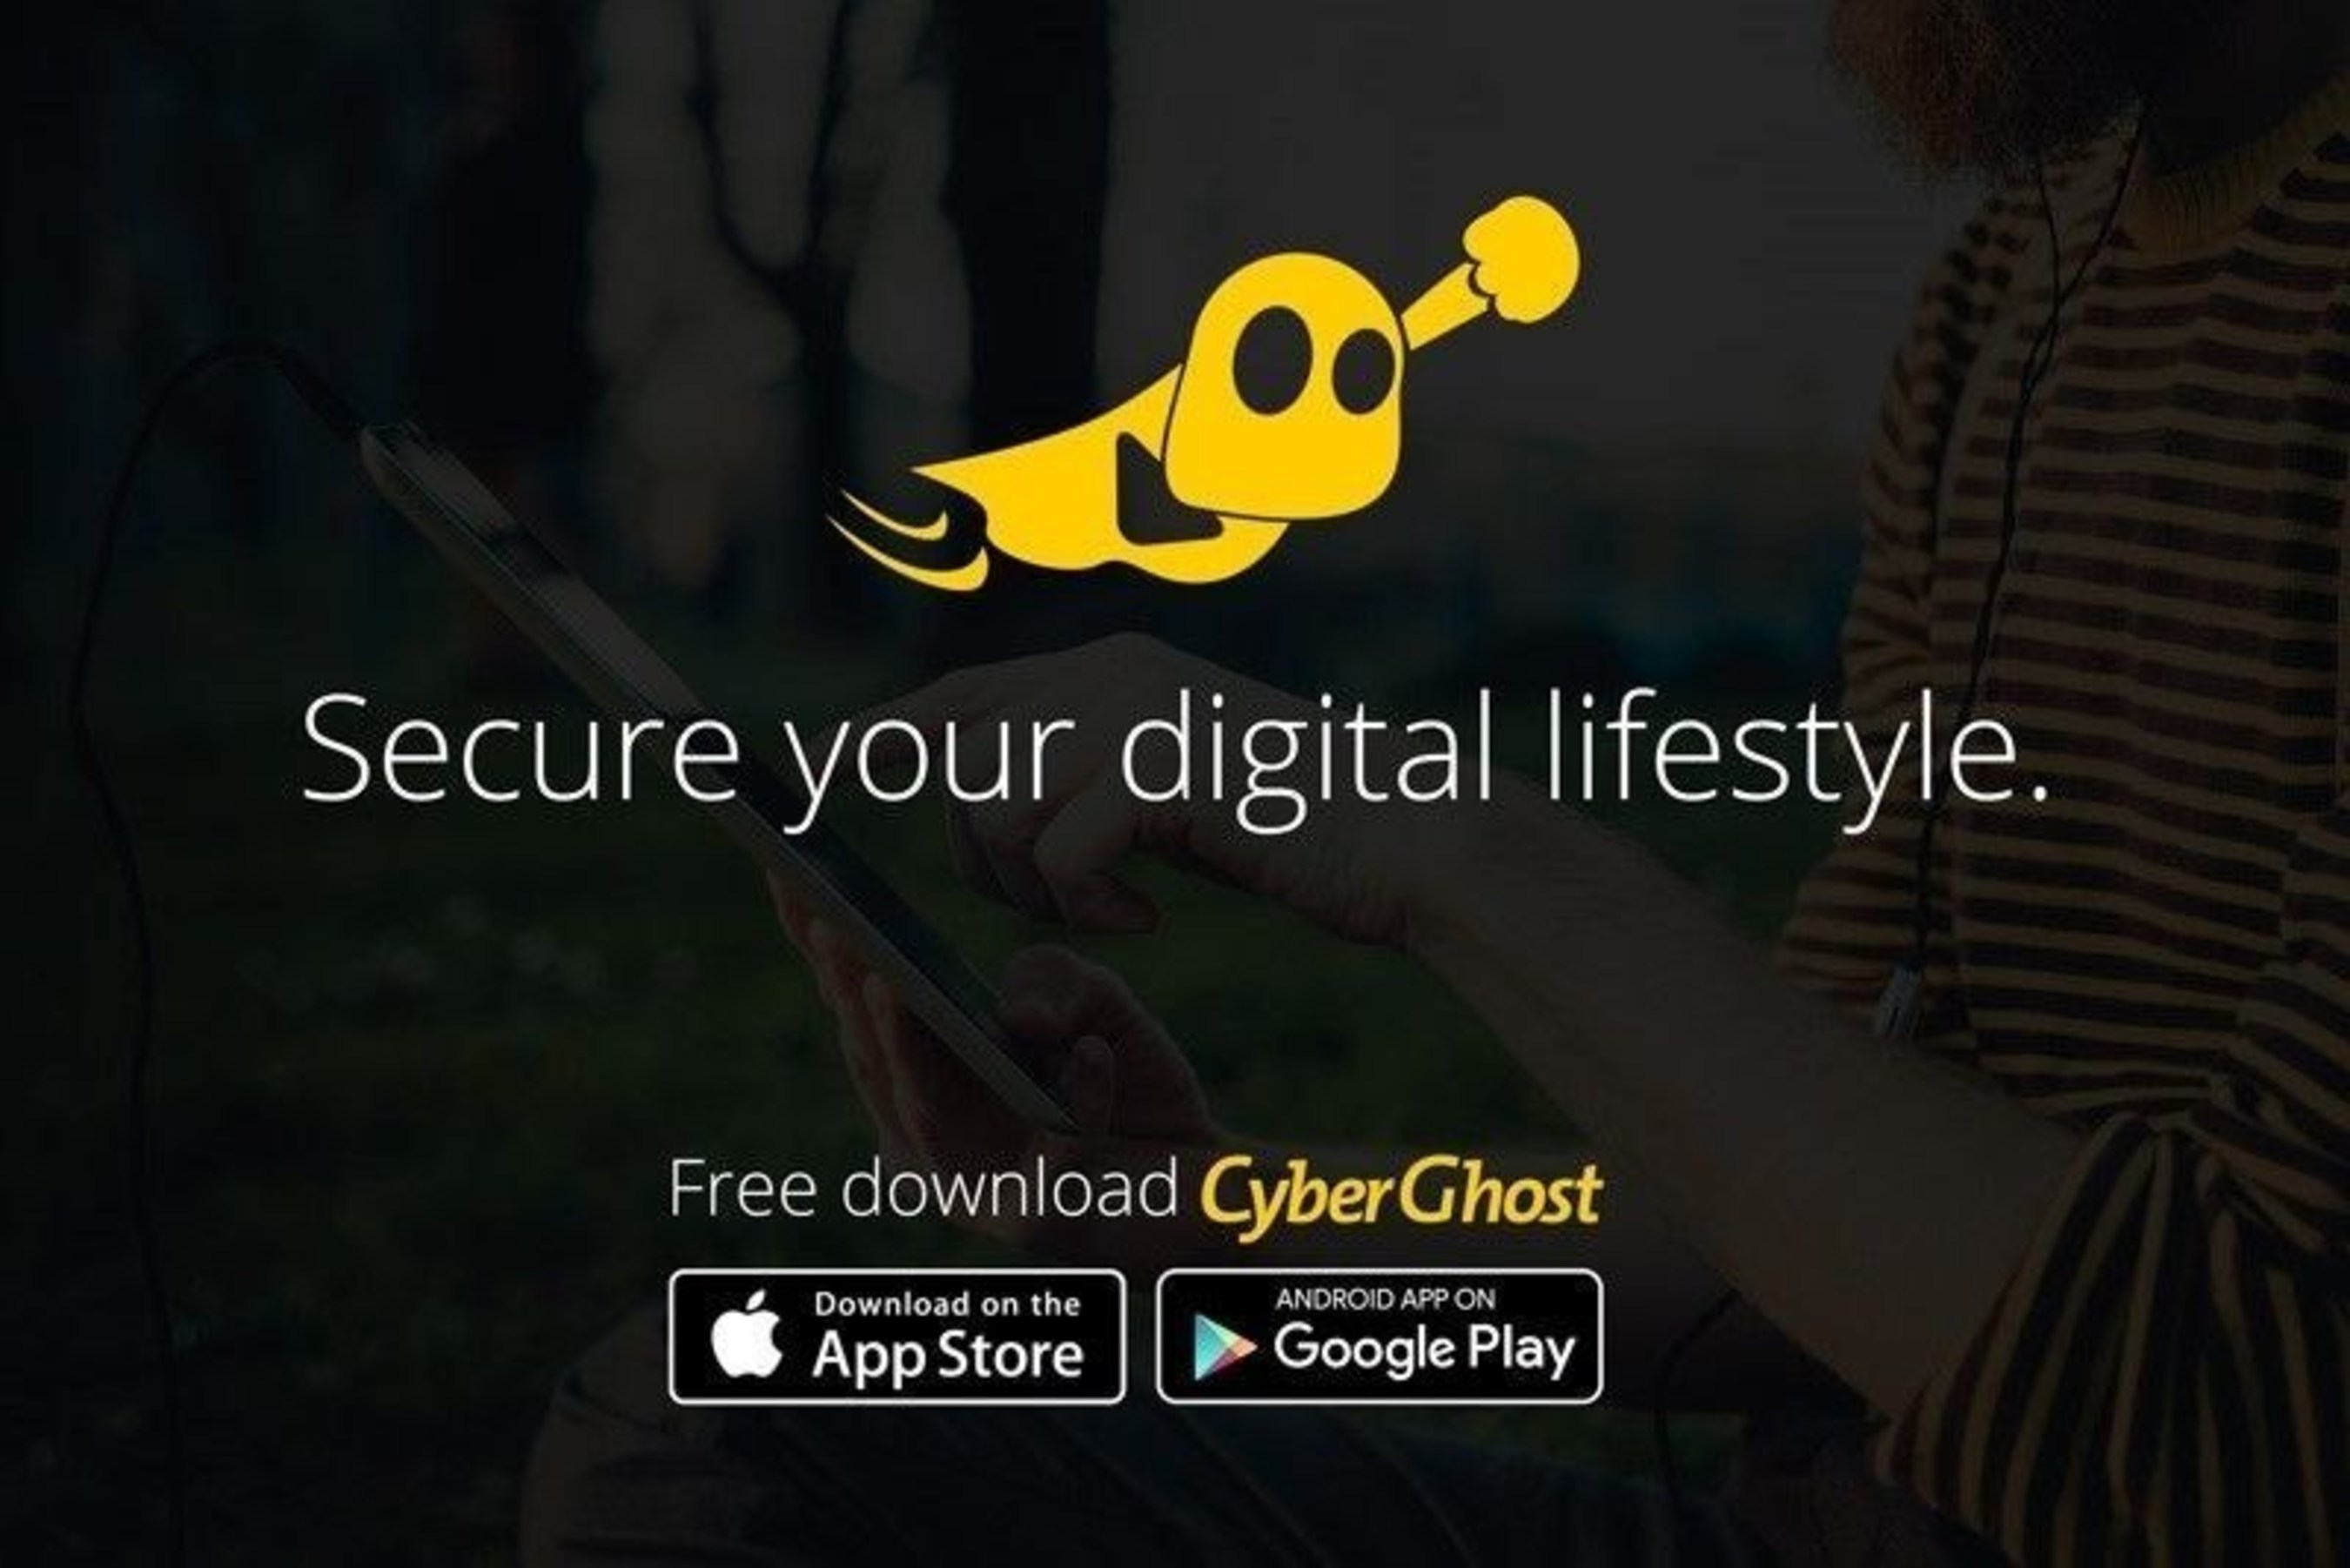 CyberGhost 6.0 for Windows: The complete one-click VPN solution to enjoy security and privacy